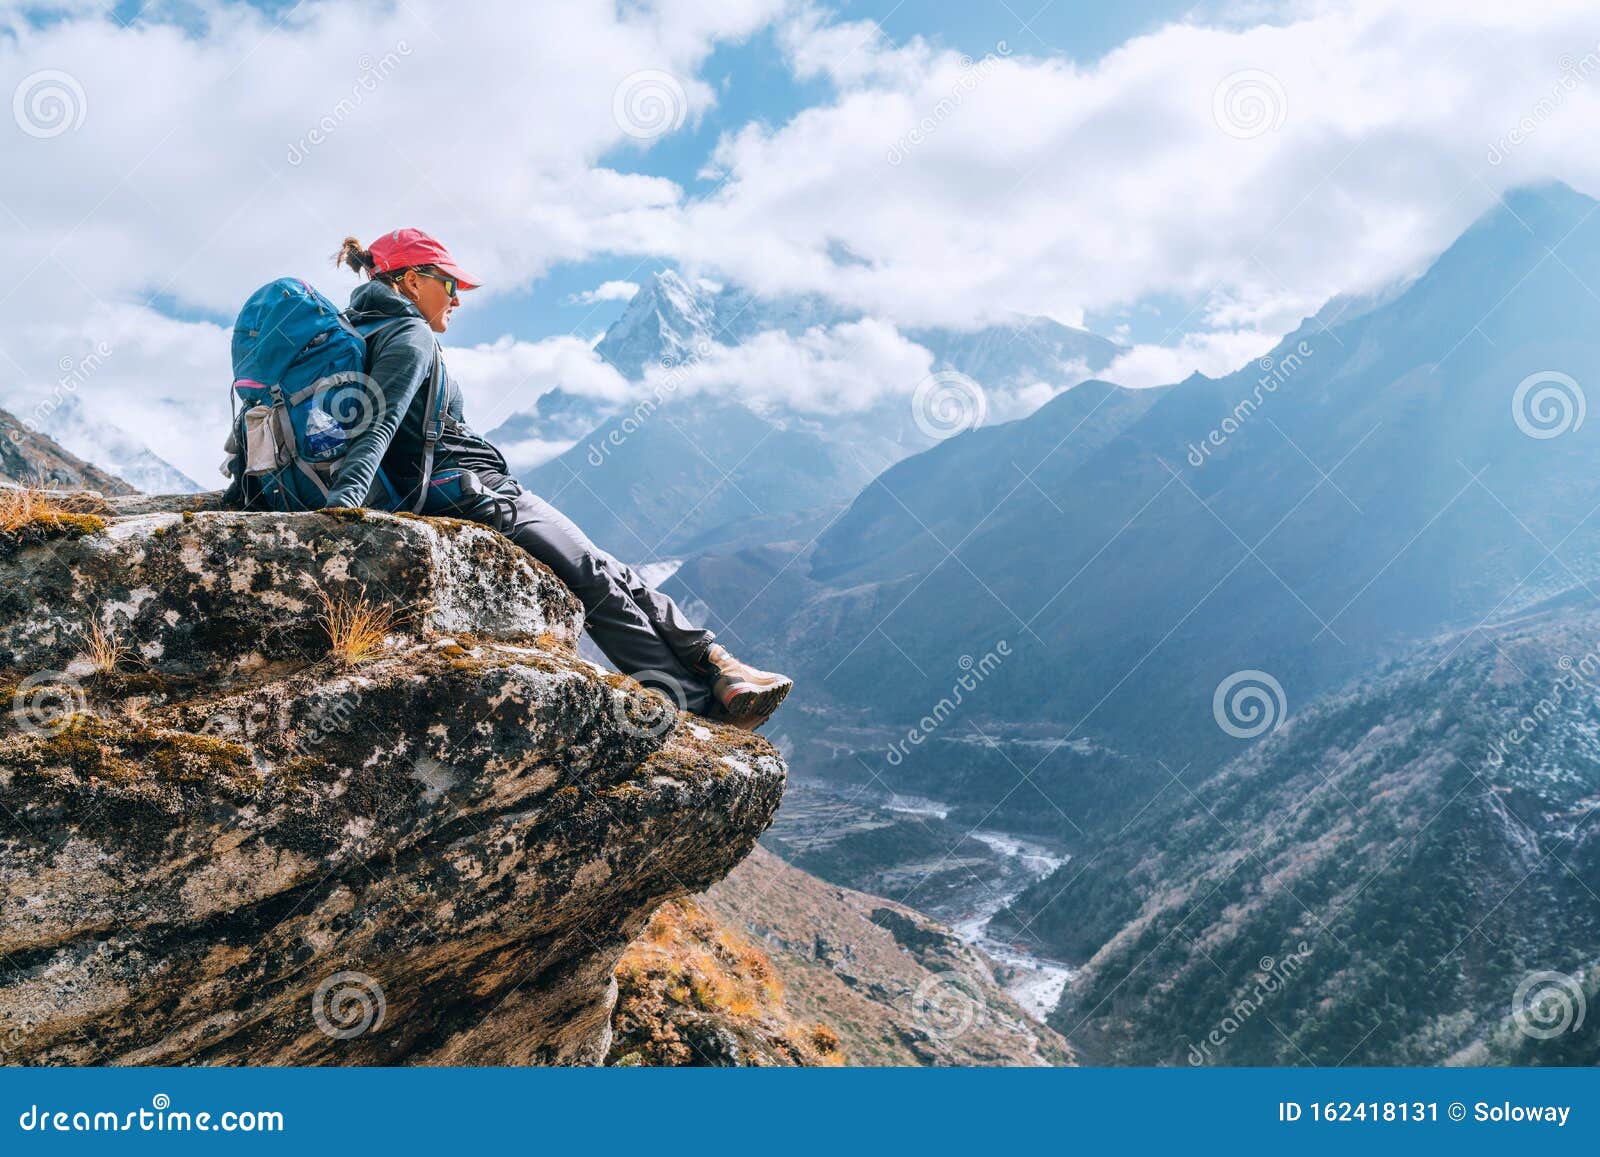 young hiker backpacker female sitting on cliff edge and enjoying the imja khola valley during high altitude everest base camp ebc